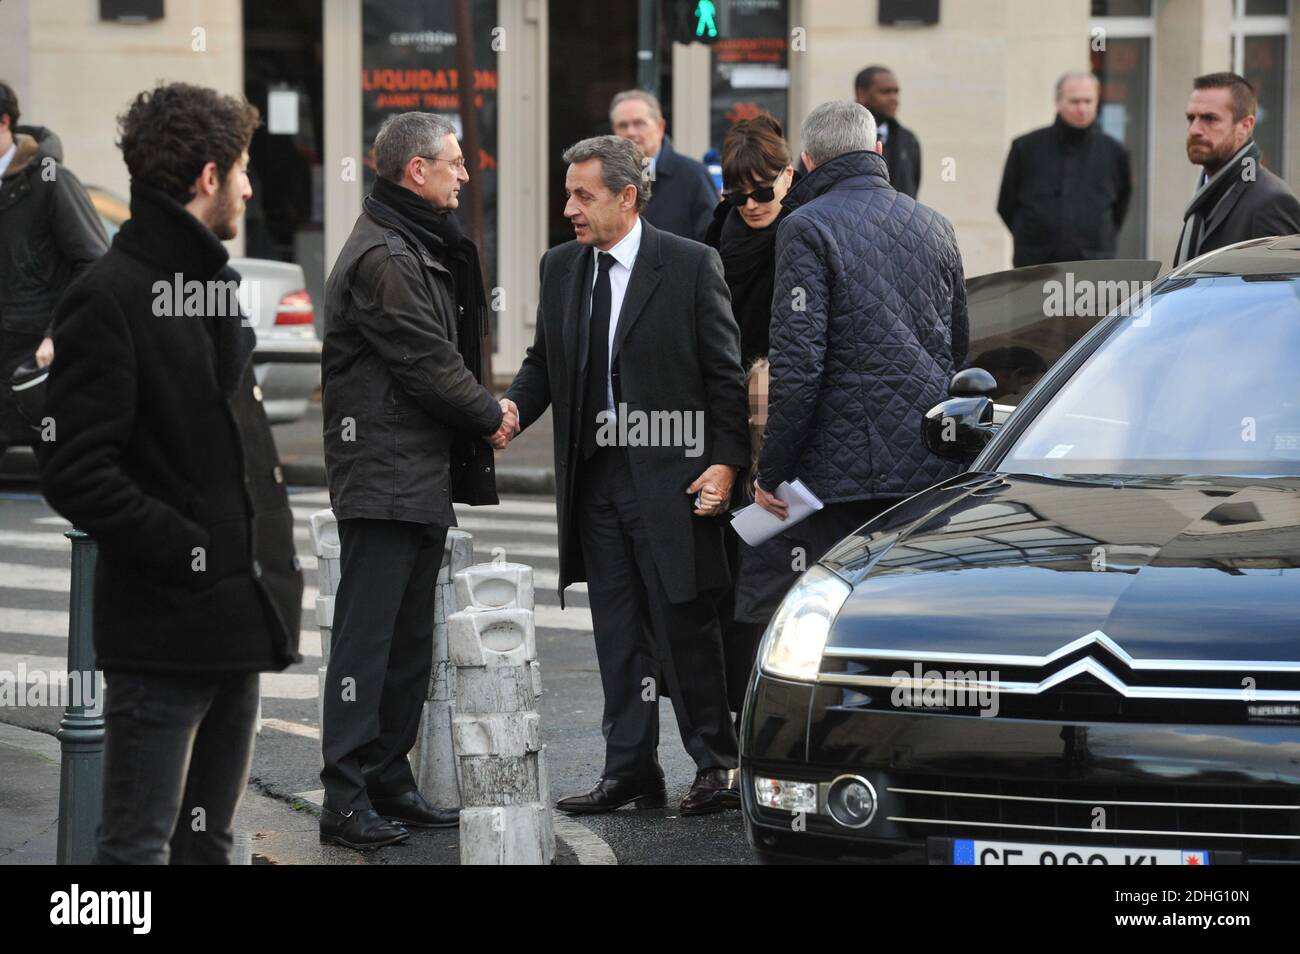 Nicolas Sarkozy, his wife Carla Bruni-Sarkozy and their daughter Giulia attending the funeral of Andree Sarkozy aka Dadue, mother of Former French President Nicolas Sarkozy, at Saint-Jean-Baptiste church in Neuilly-Sur-Seine, France on December 18, 2017. Photo by ABACAPRESS.COM Stock Photo